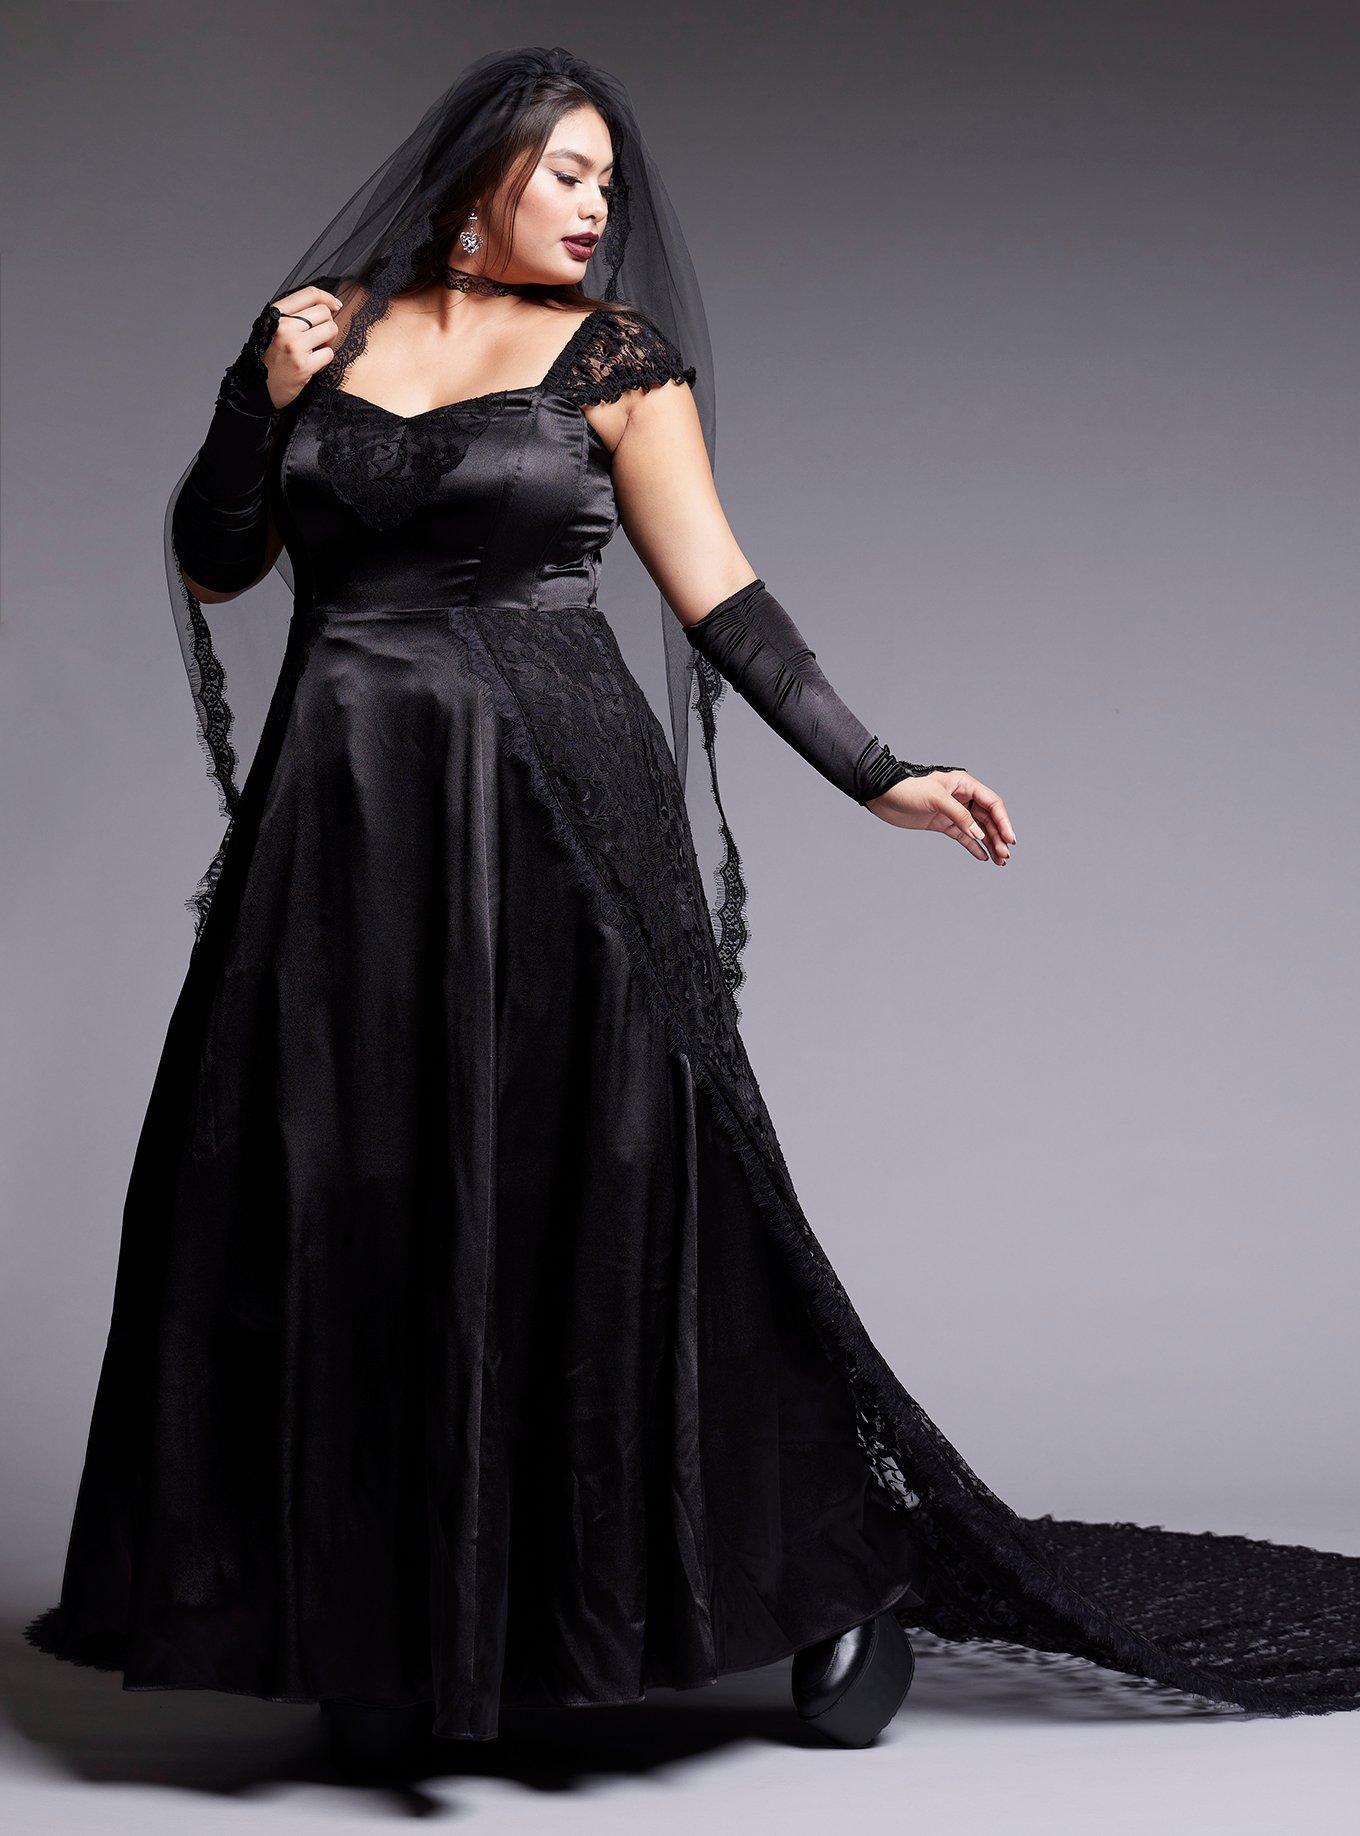 Black Lace Gothic Special Occasion Dress Plus Size Limited Edition